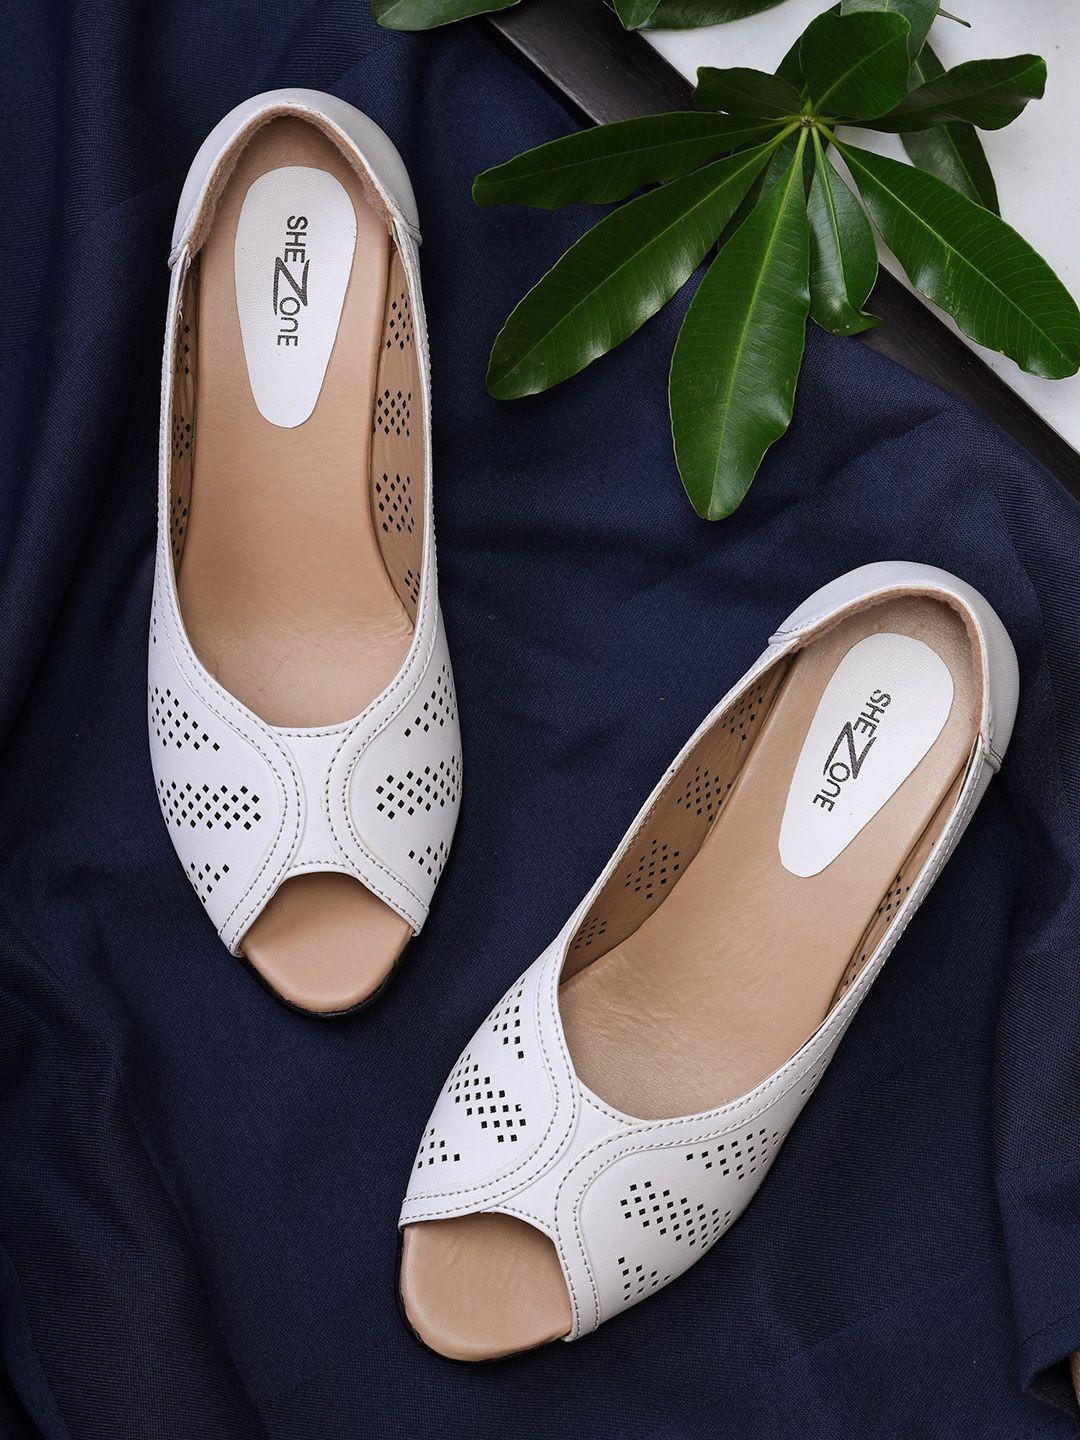 shezone white wedge peep toes with laser cuts